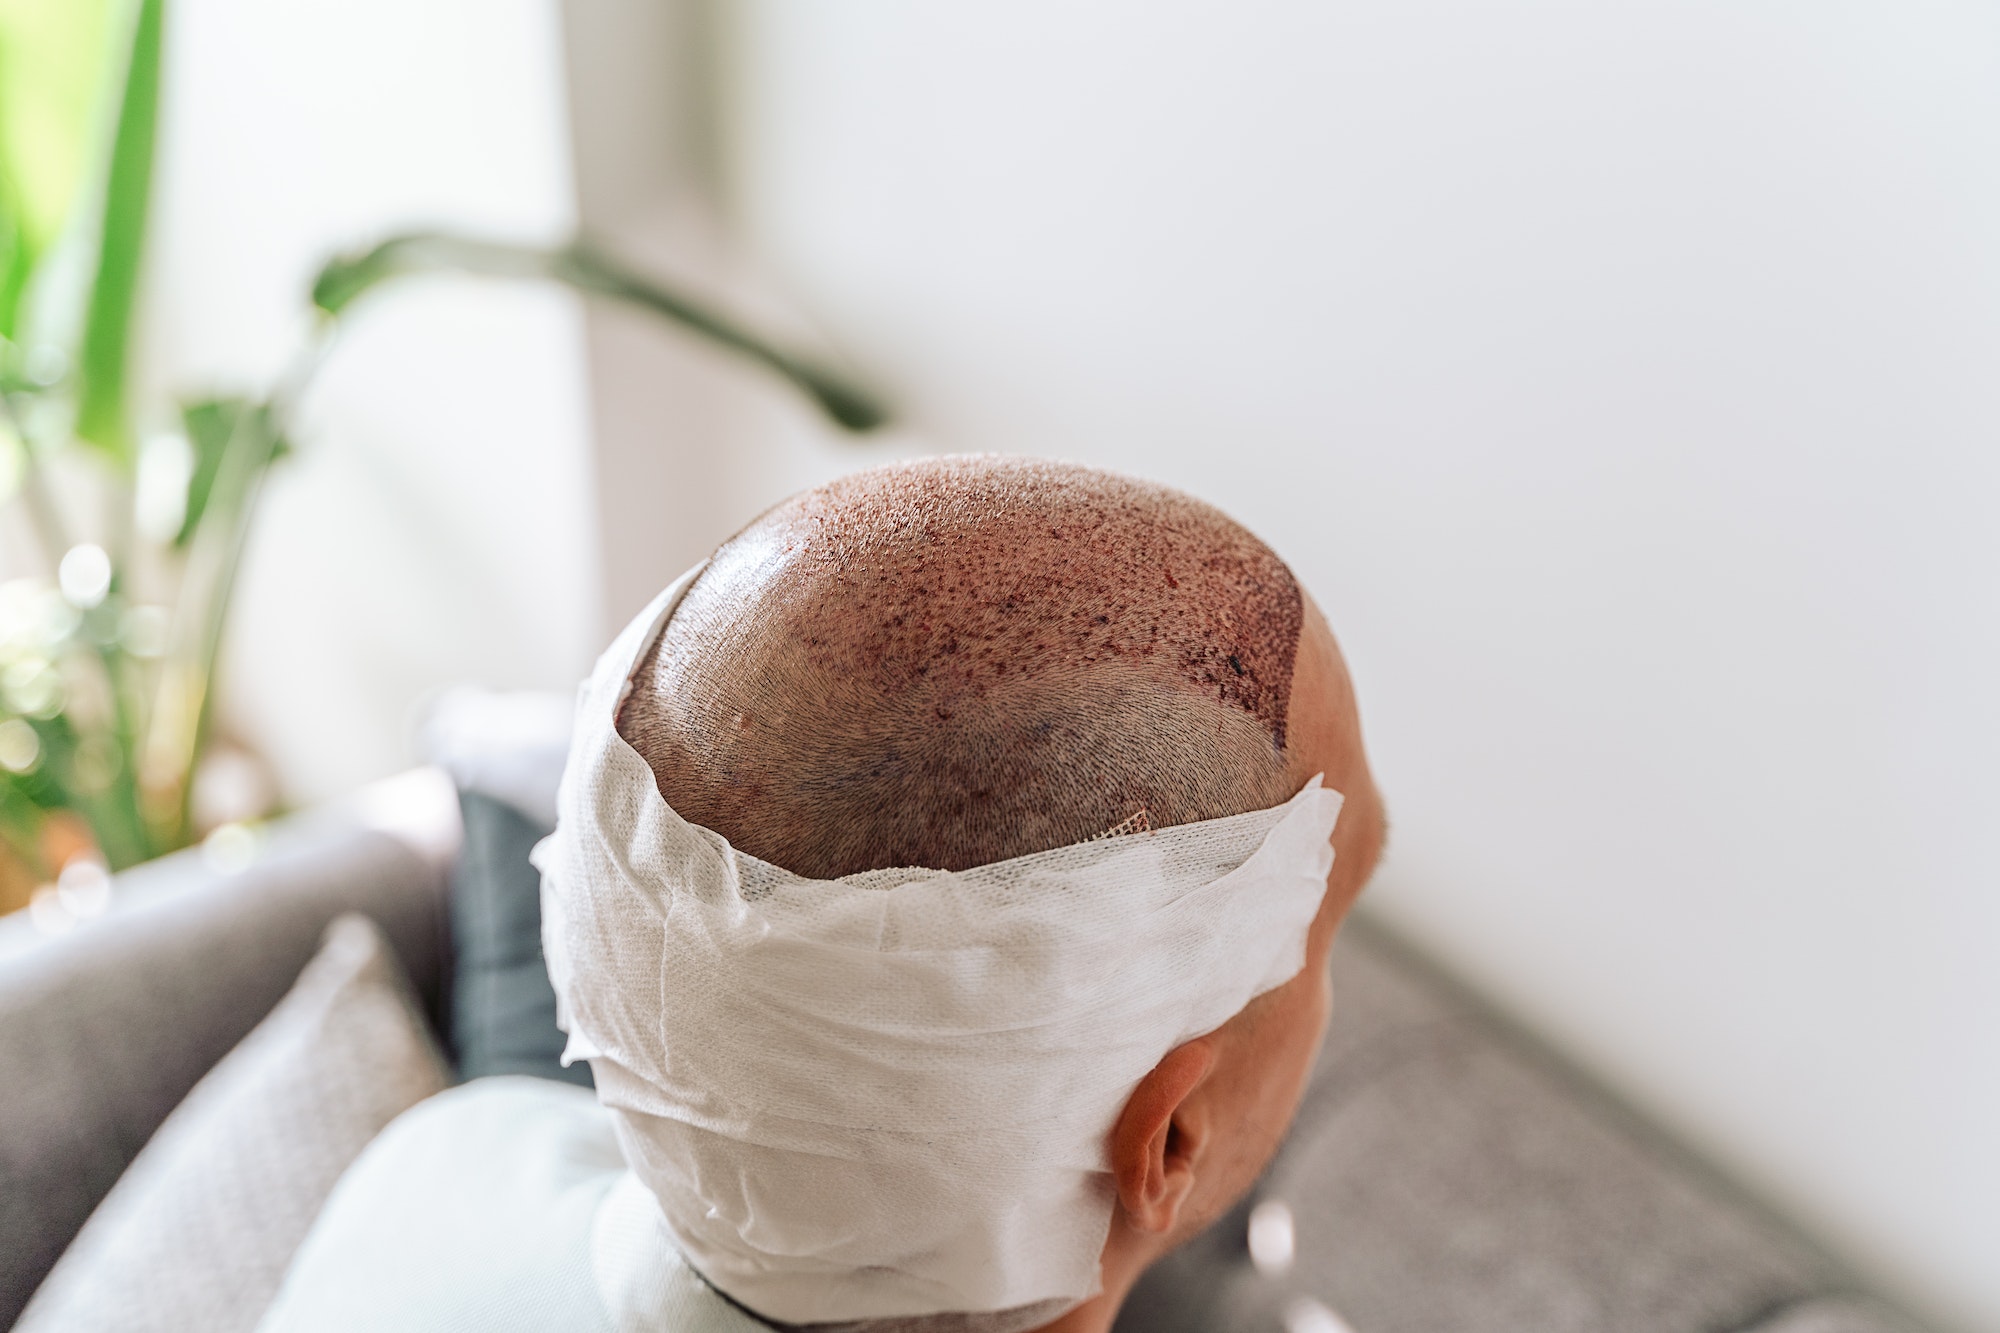 After hair transplantation surgical technique that moves hair follicles. Young bald man in bandage